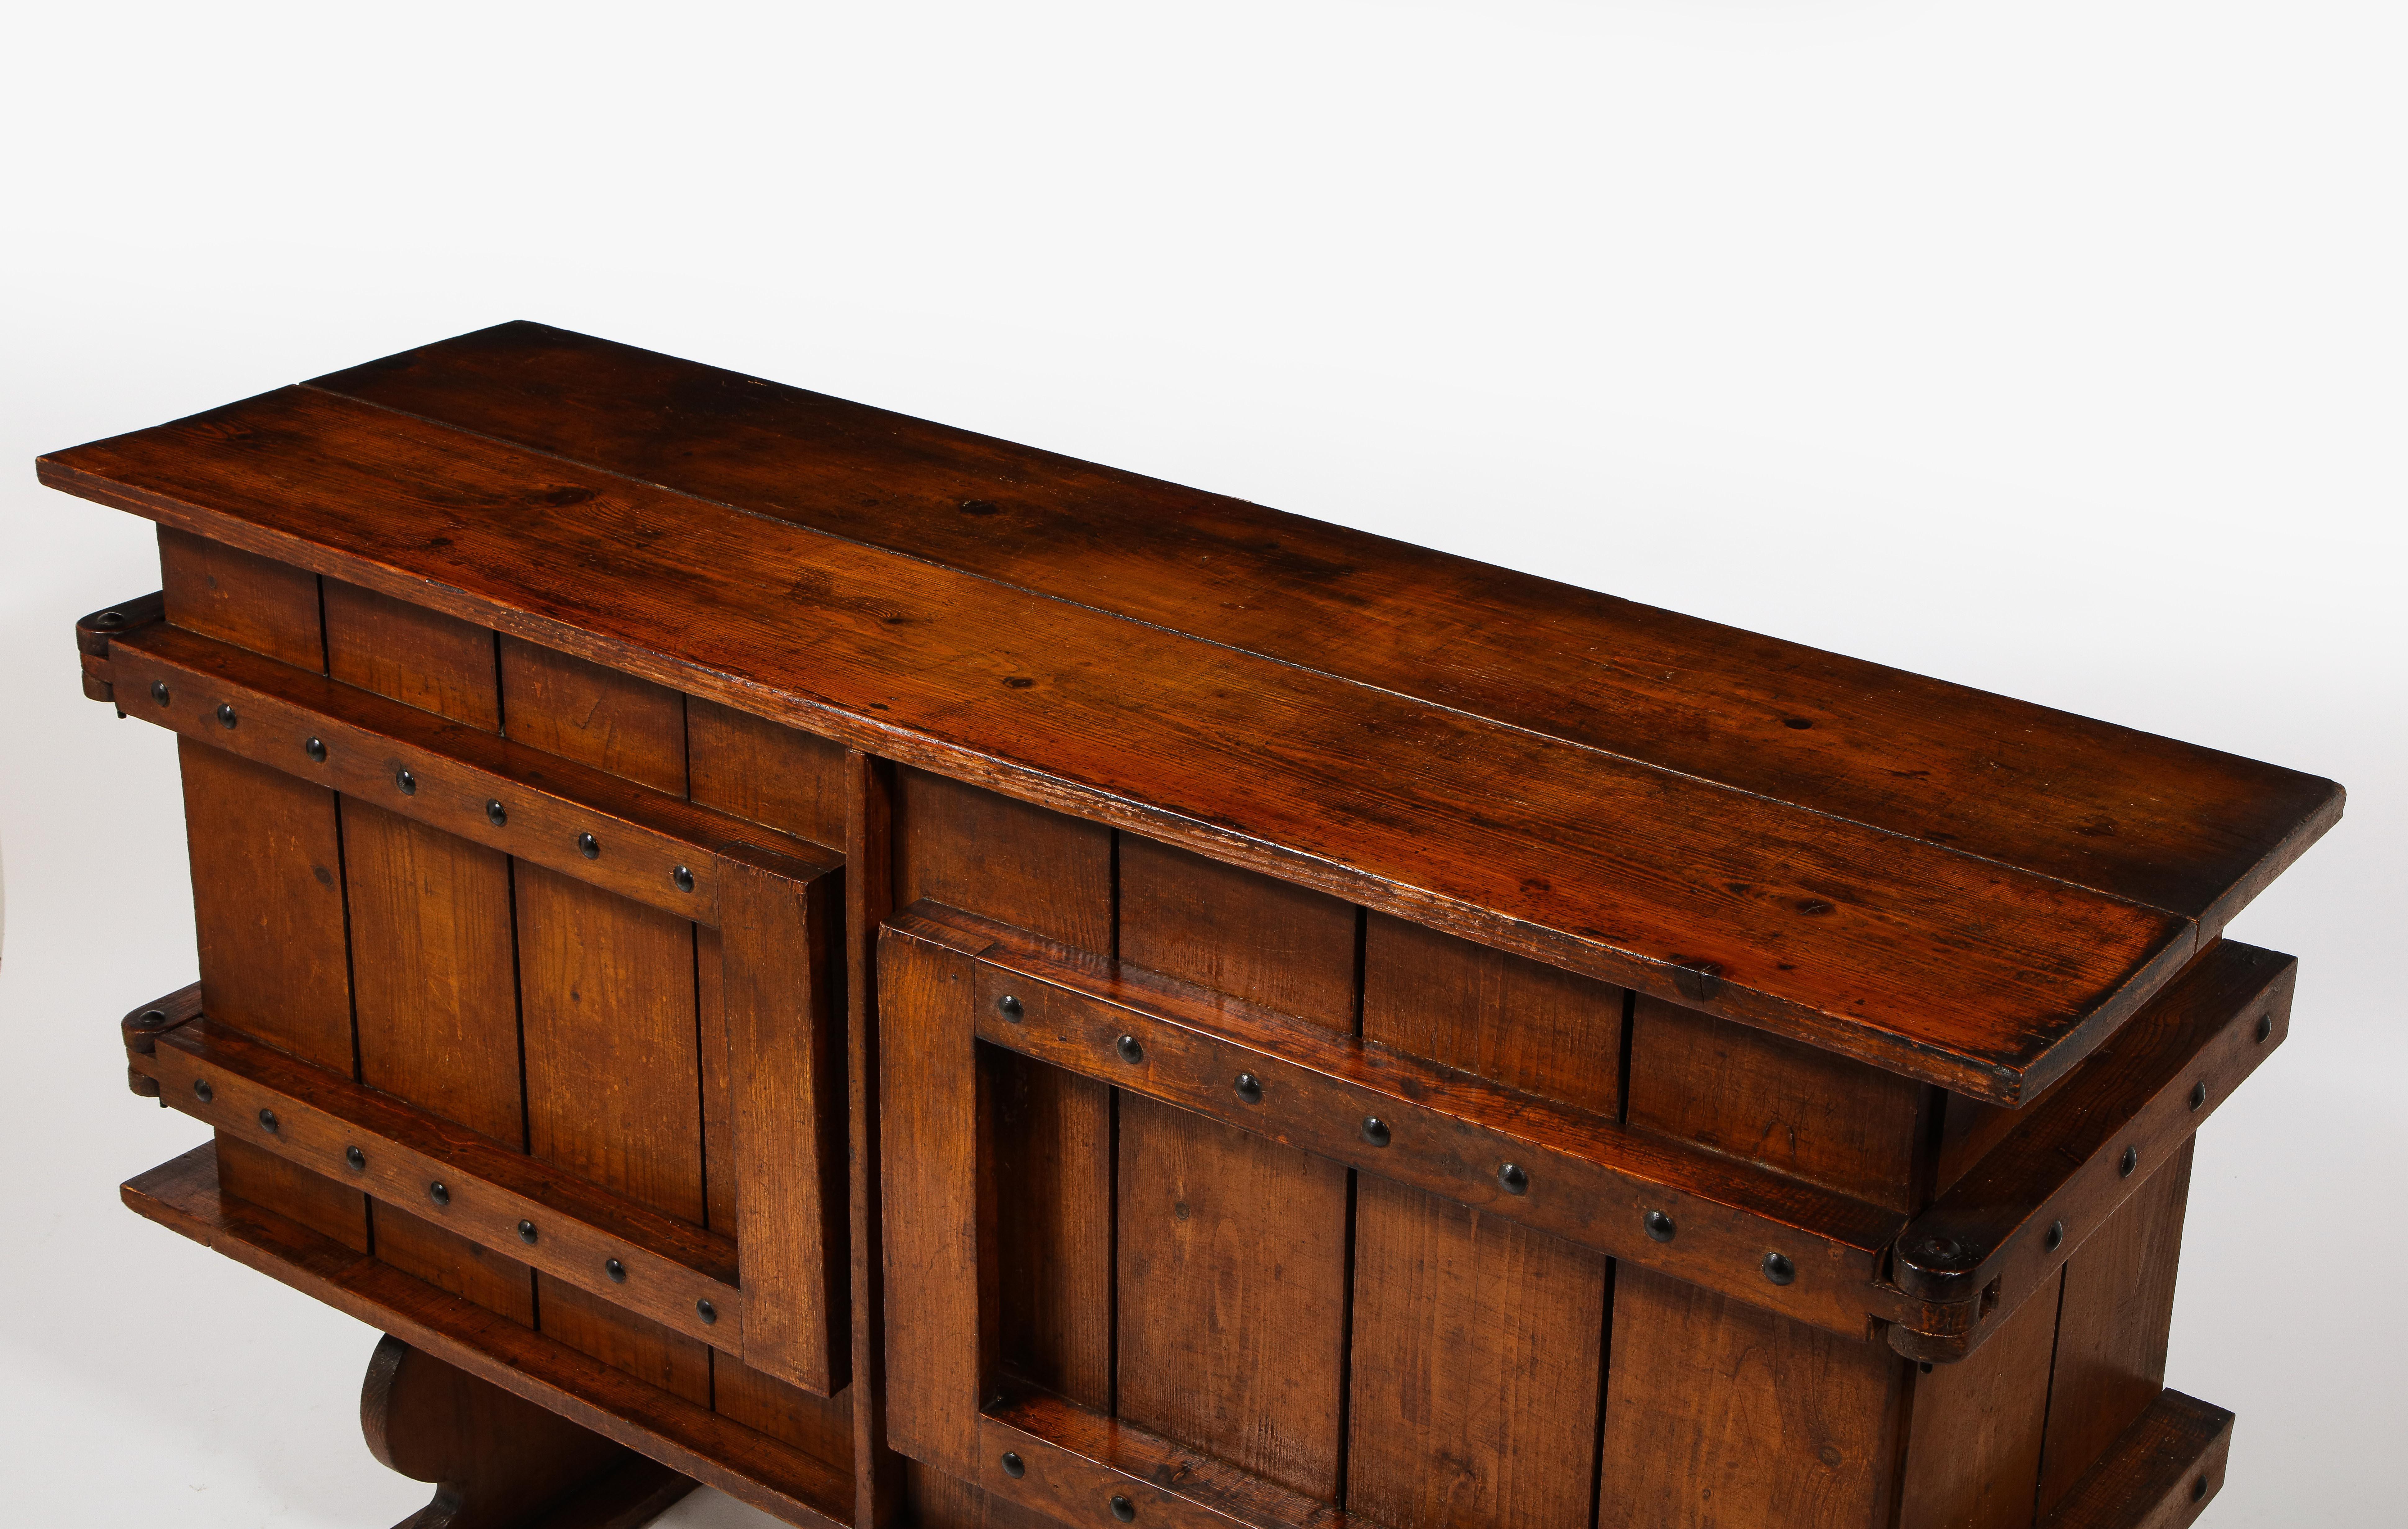 Brutalist Neo-Gothic Rustic Two-Door Pine Sideboard Credenza, France 1920's For Sale 1